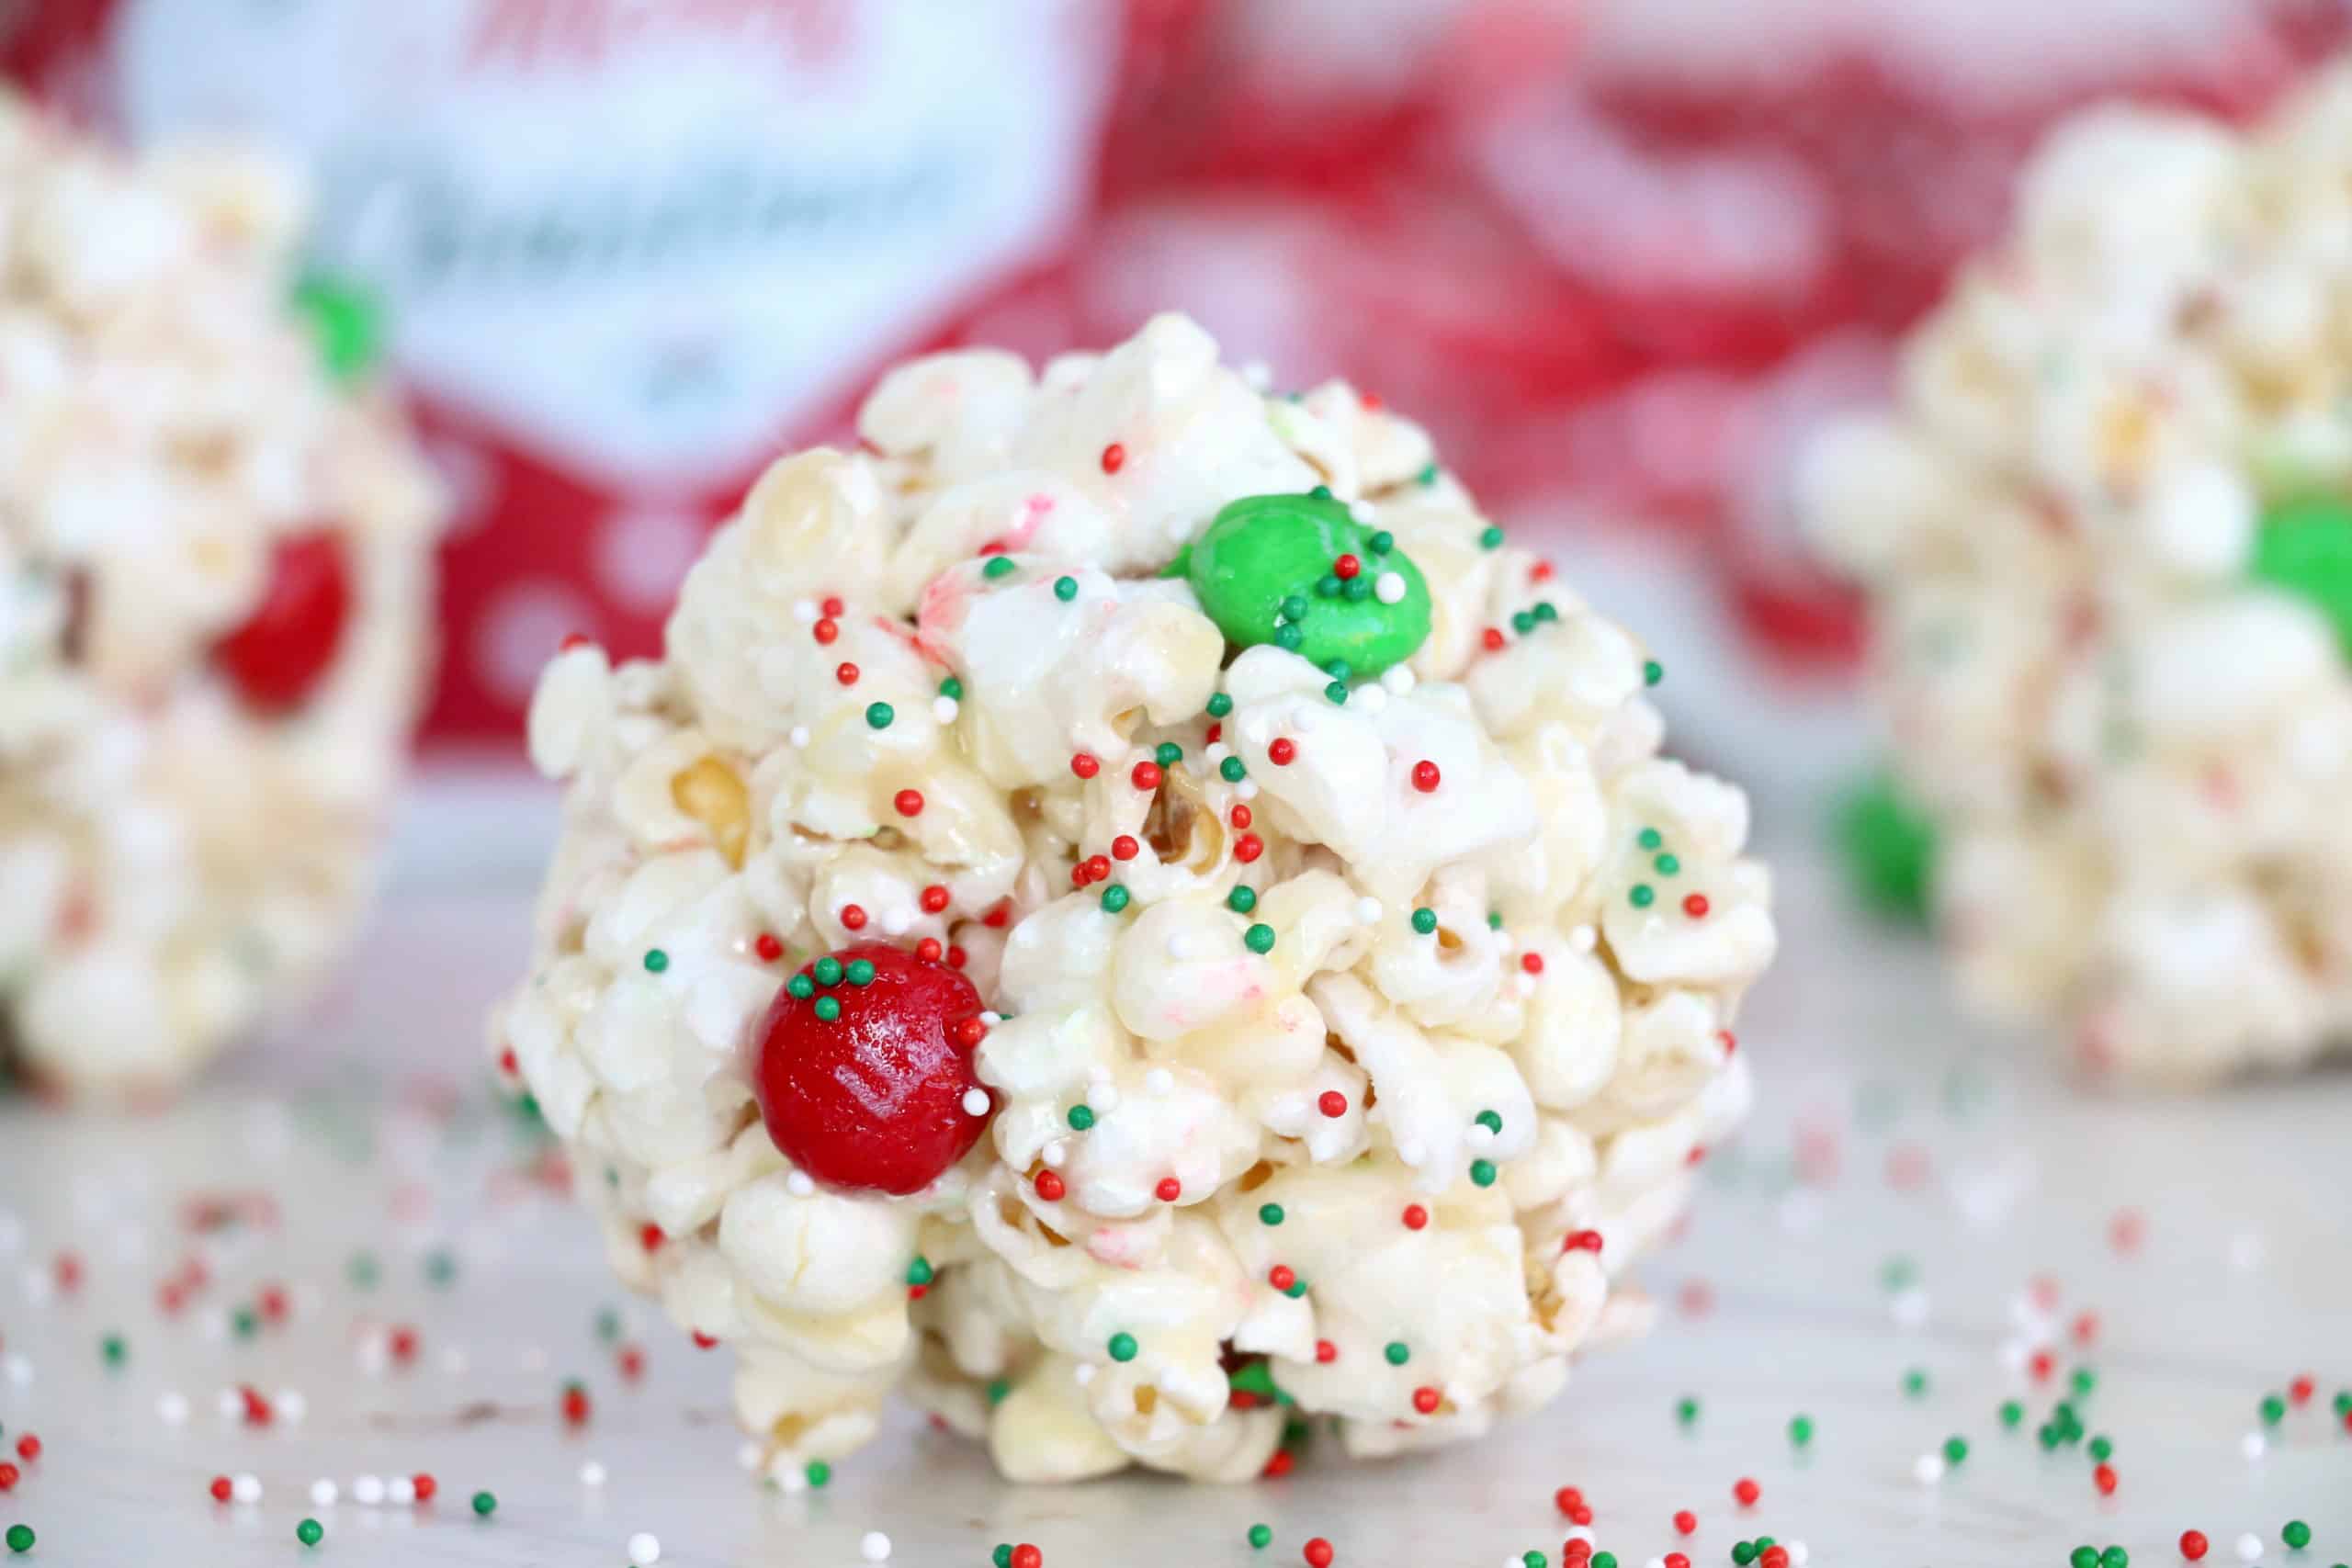 Easy Popcorn Balls are a perfect sweet, delicious treat for any occassion. This old-fashioned recipe is sure to put a smile on everyone's face! #inspirationalmomma #easypopcornballs #popcornballsrecipe #recipe #dessert #sweet #easy #Christmas #holidays